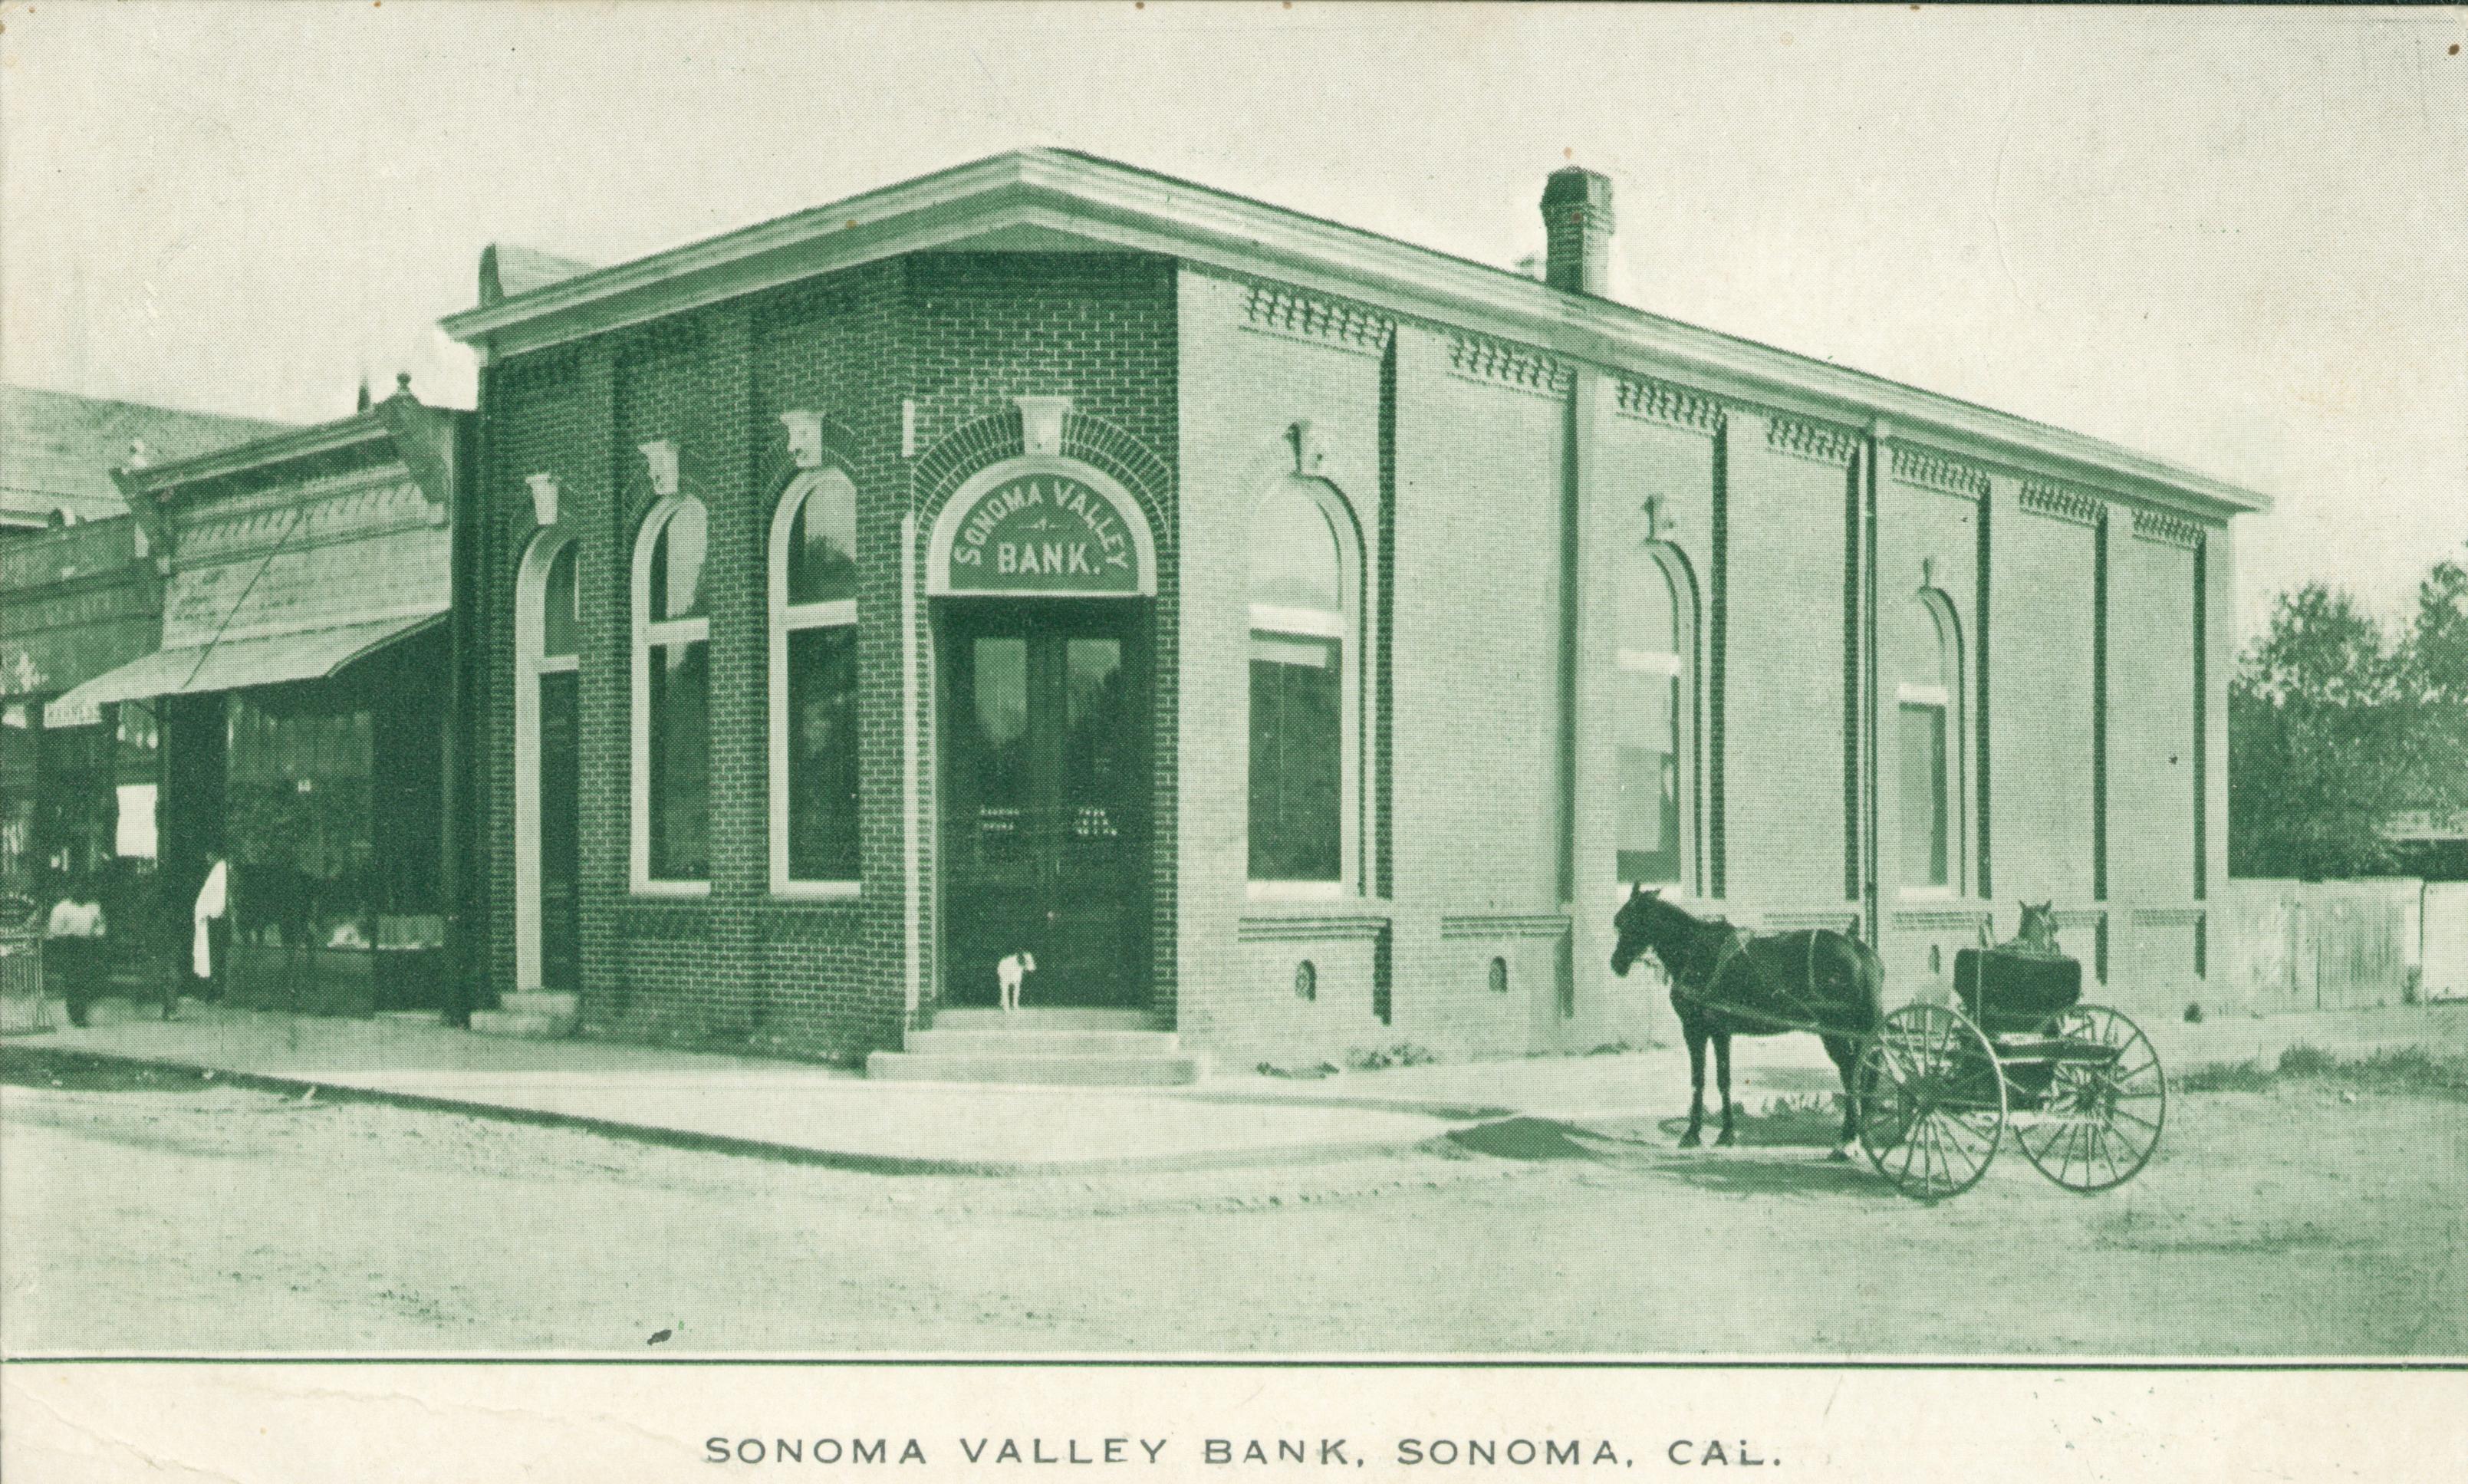 Shows a corner view of the Sonoma Valley Bank